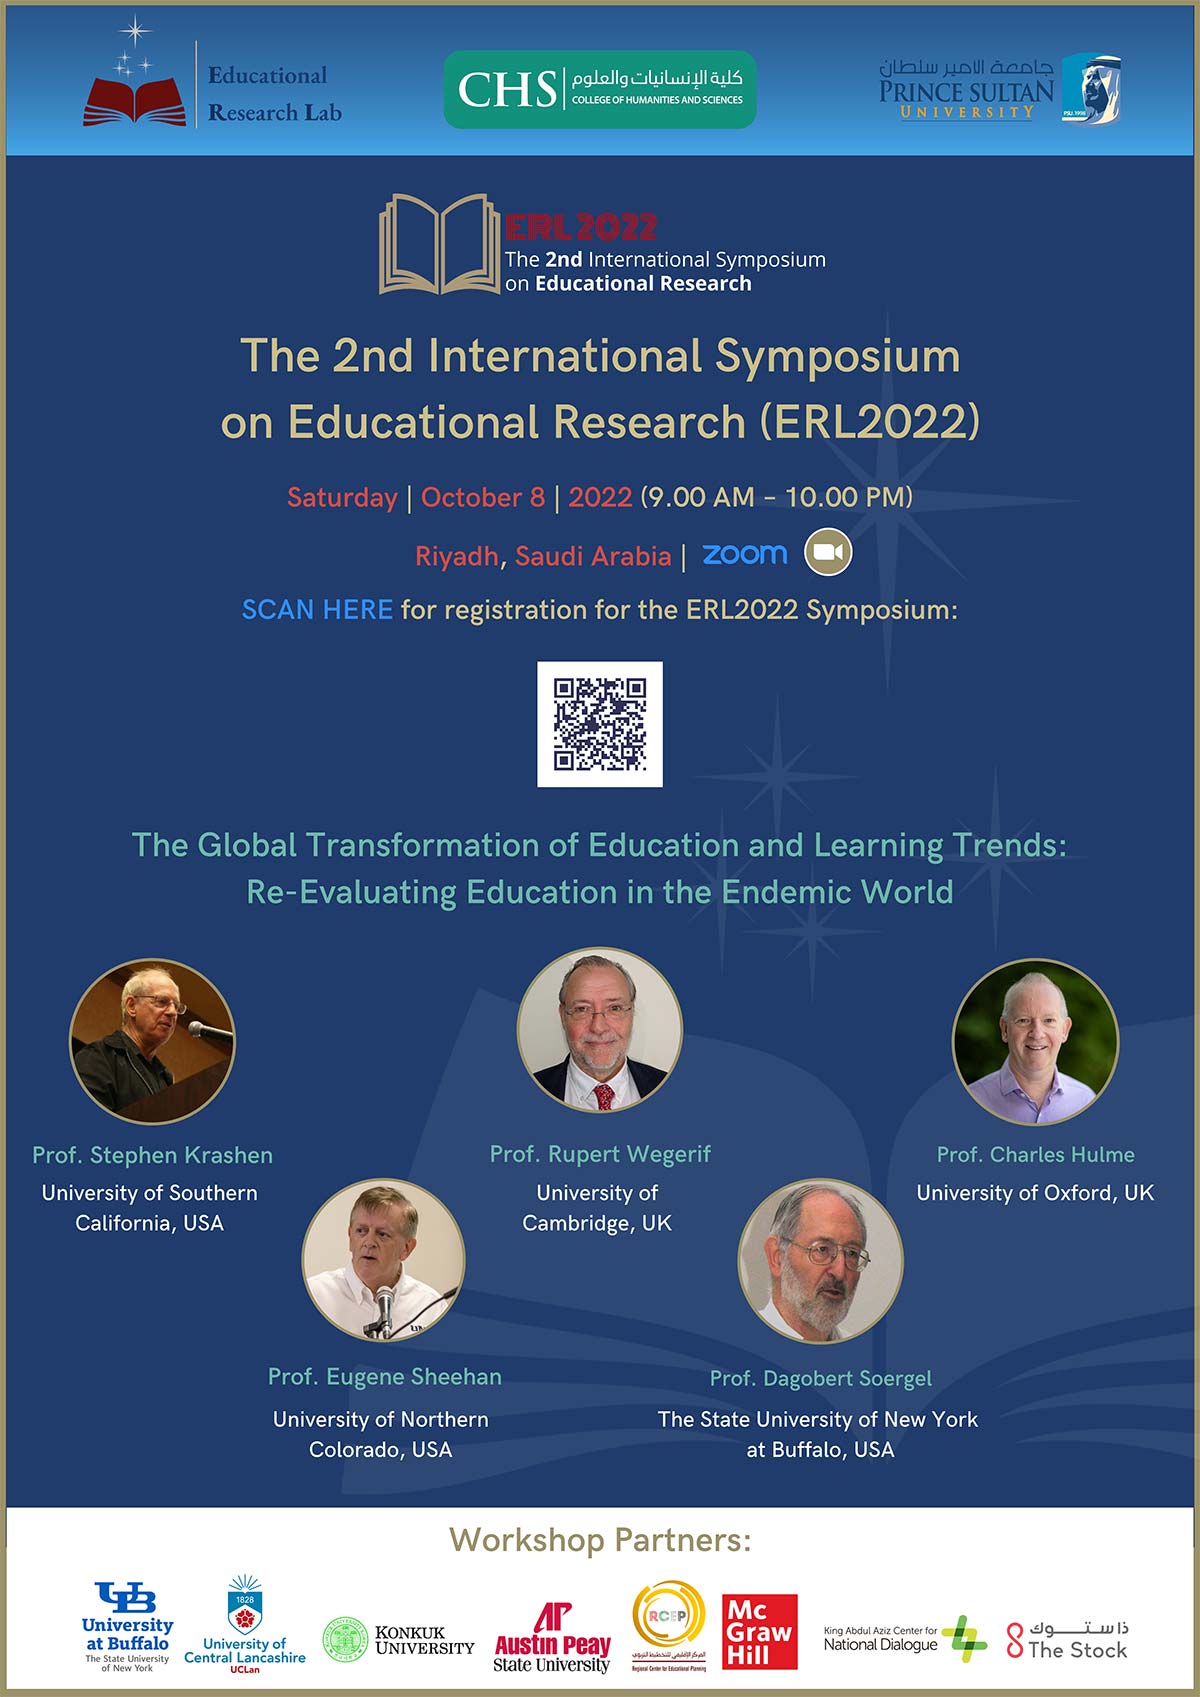 The 2nd International Symposium on Educational Research (ERL2022)